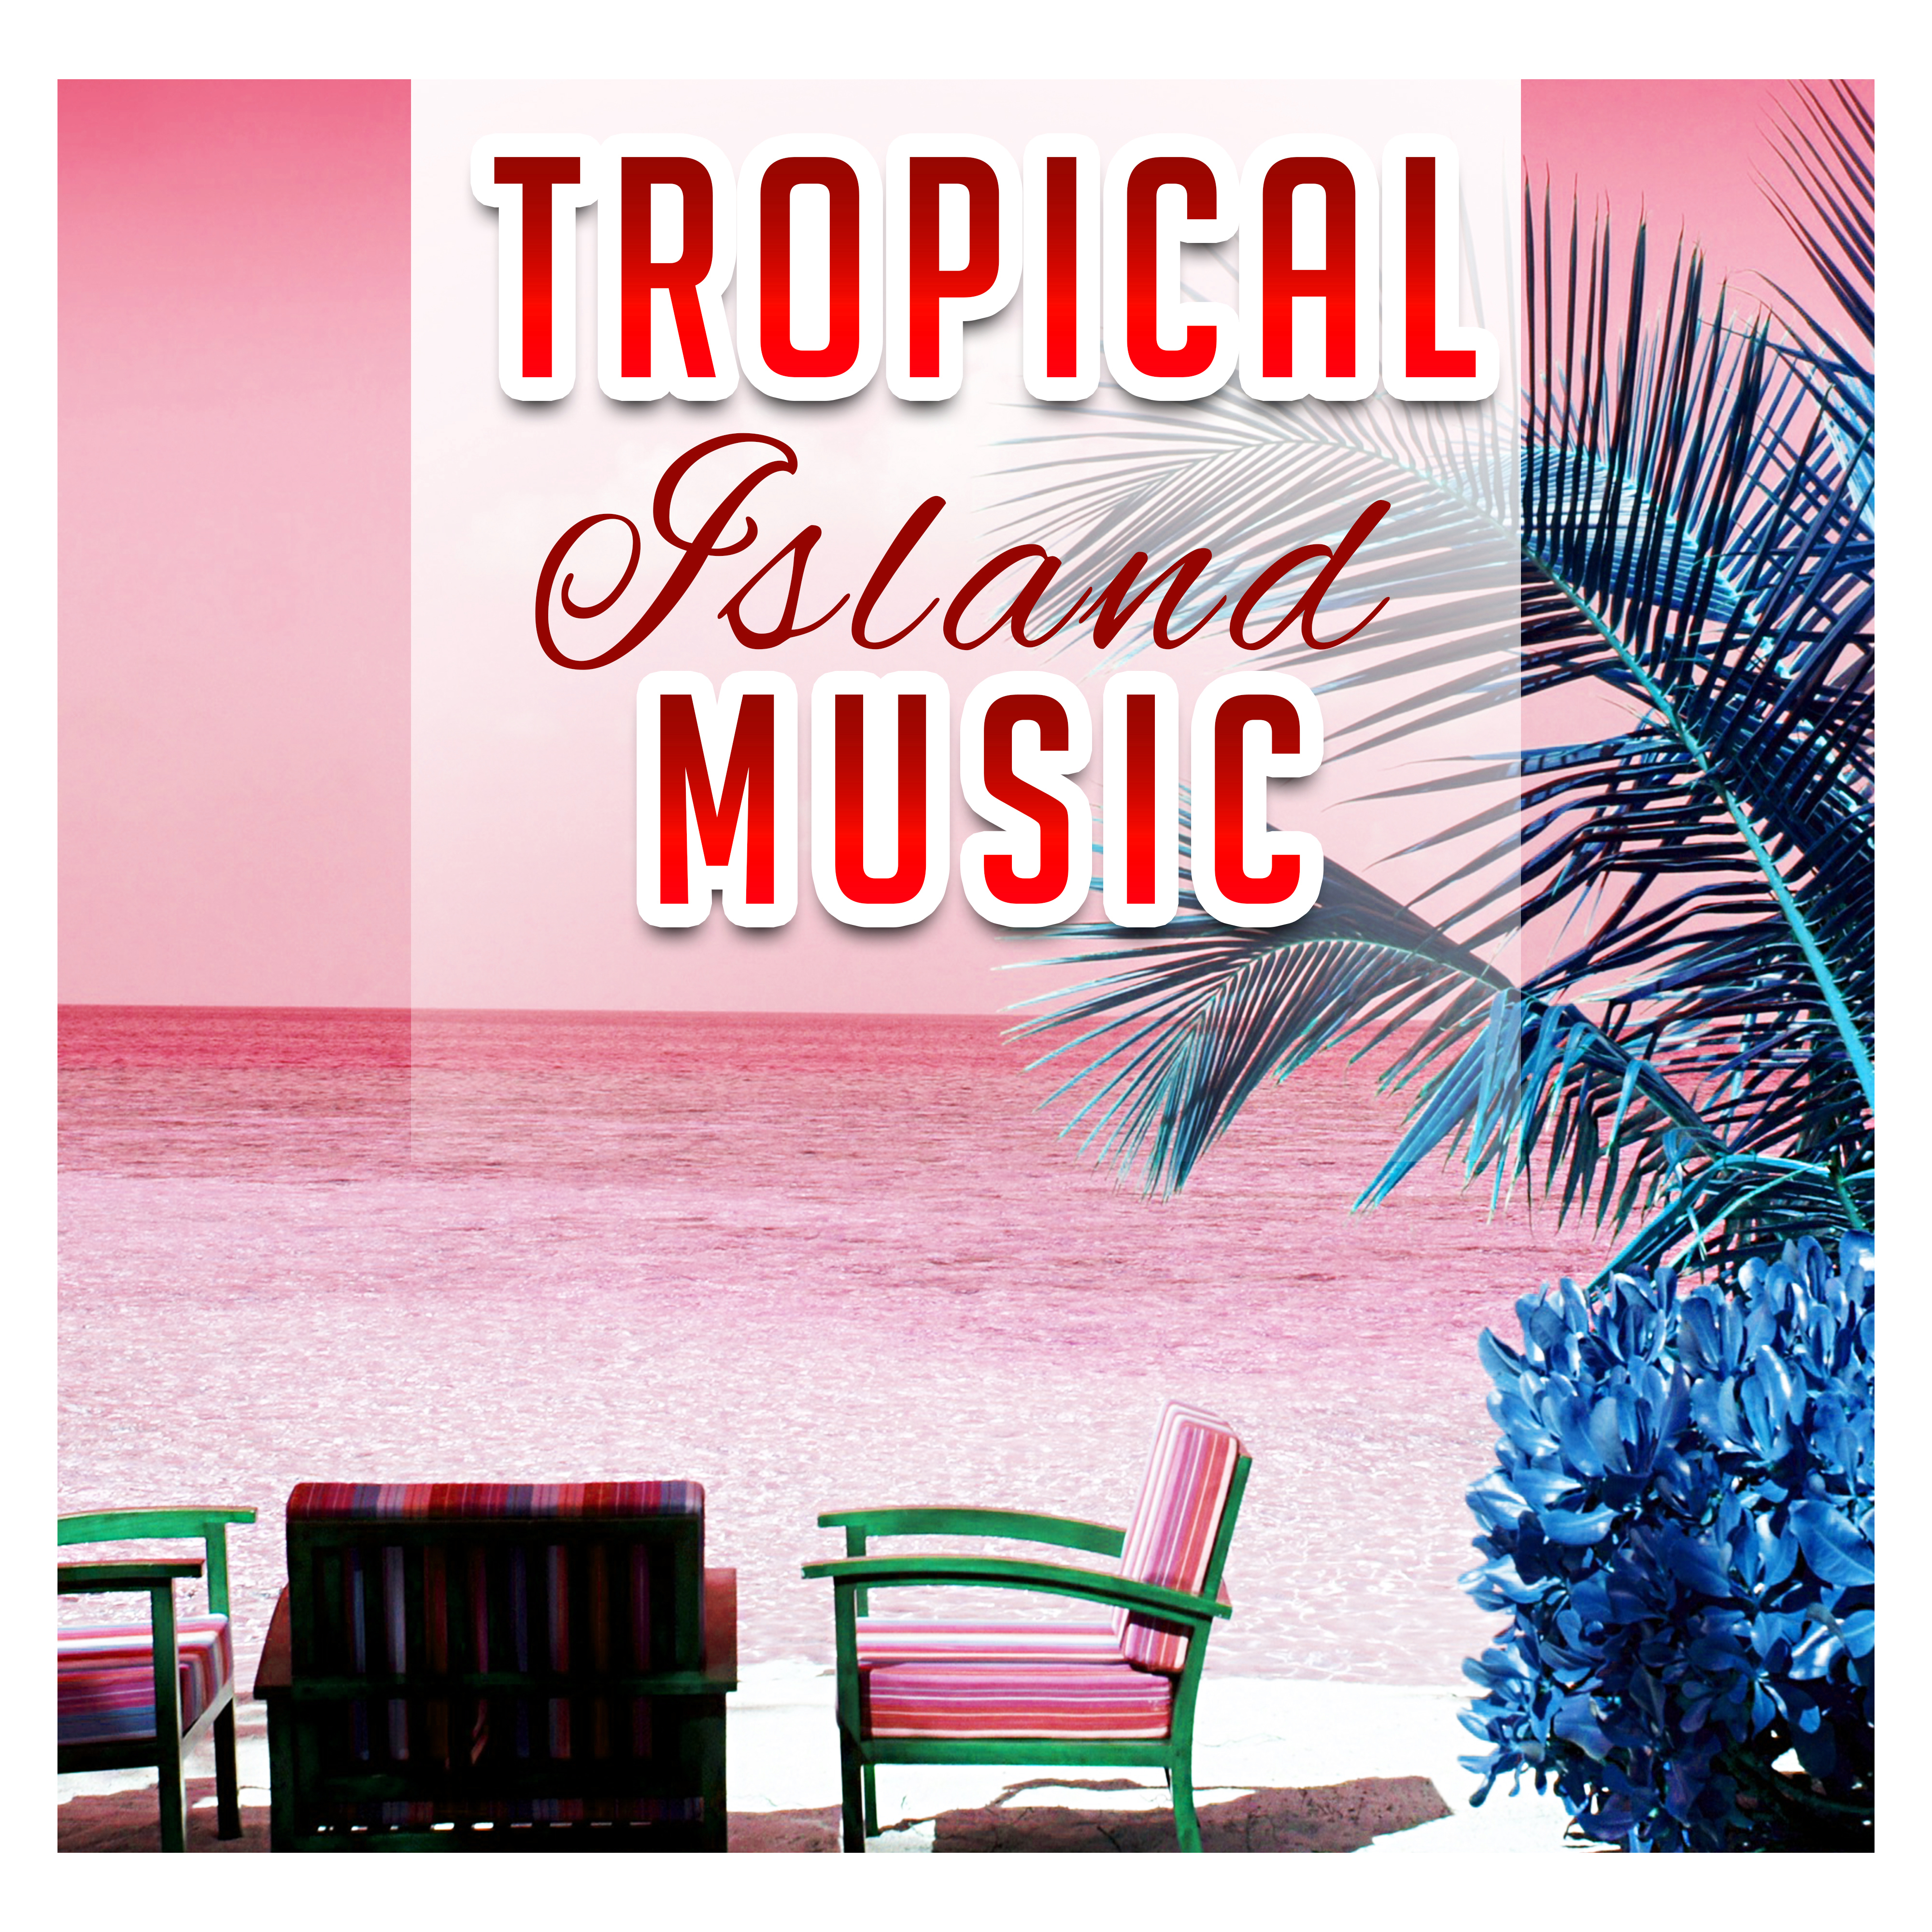 Tropical Island Music  Relaxing Music to Calm Down, Stress Relief, Summer Rest